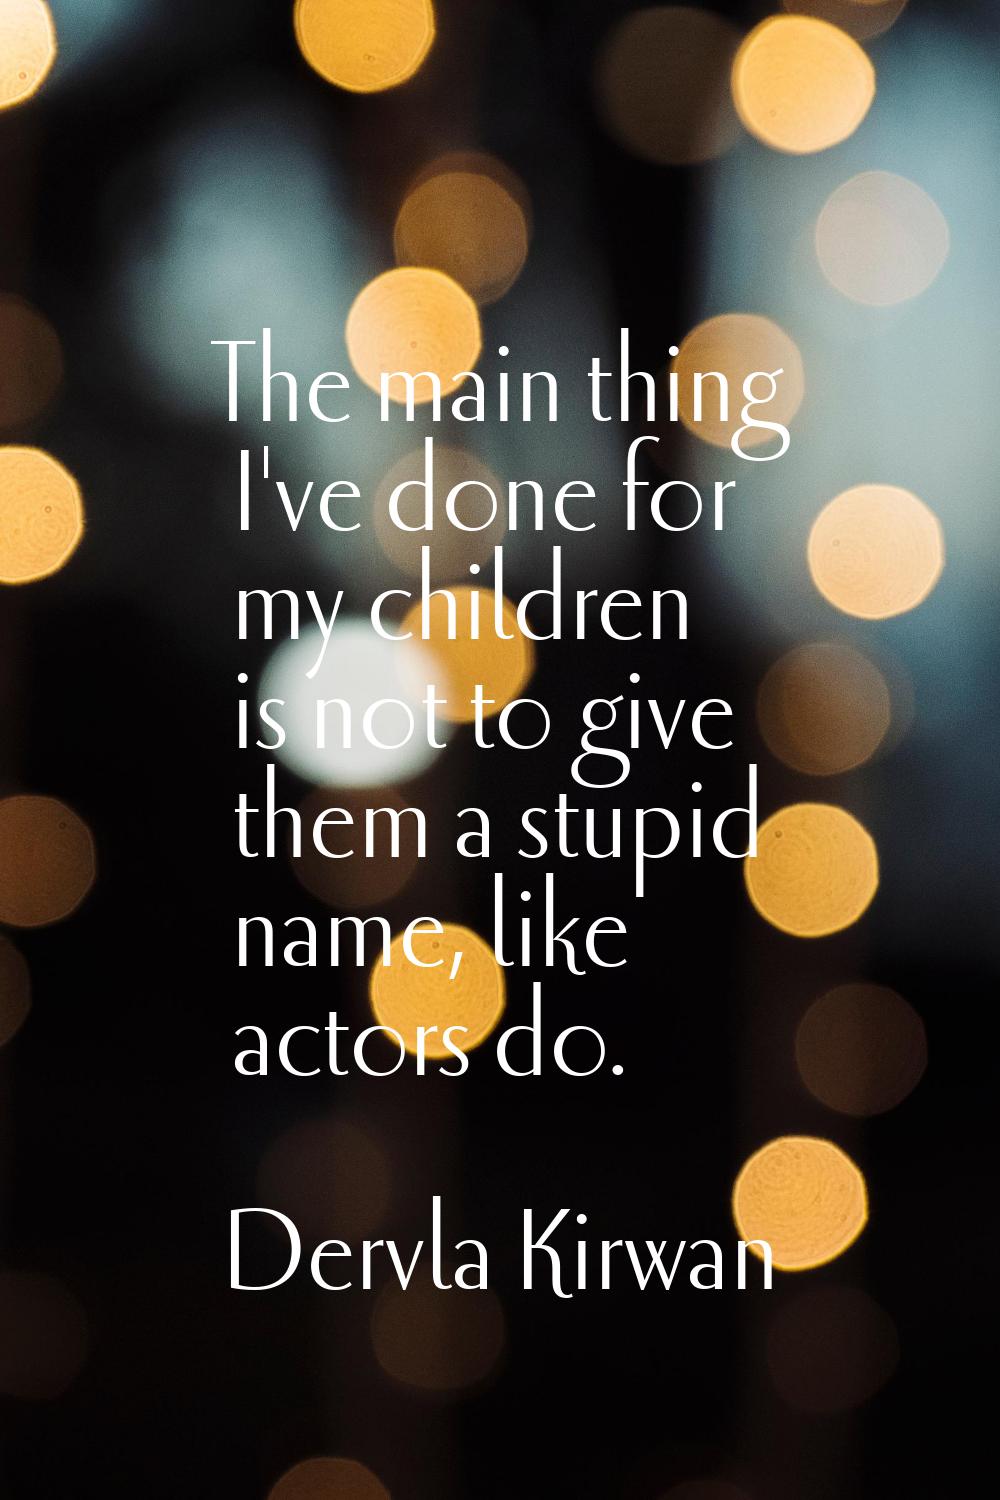 The main thing I've done for my children is not to give them a stupid name, like actors do.